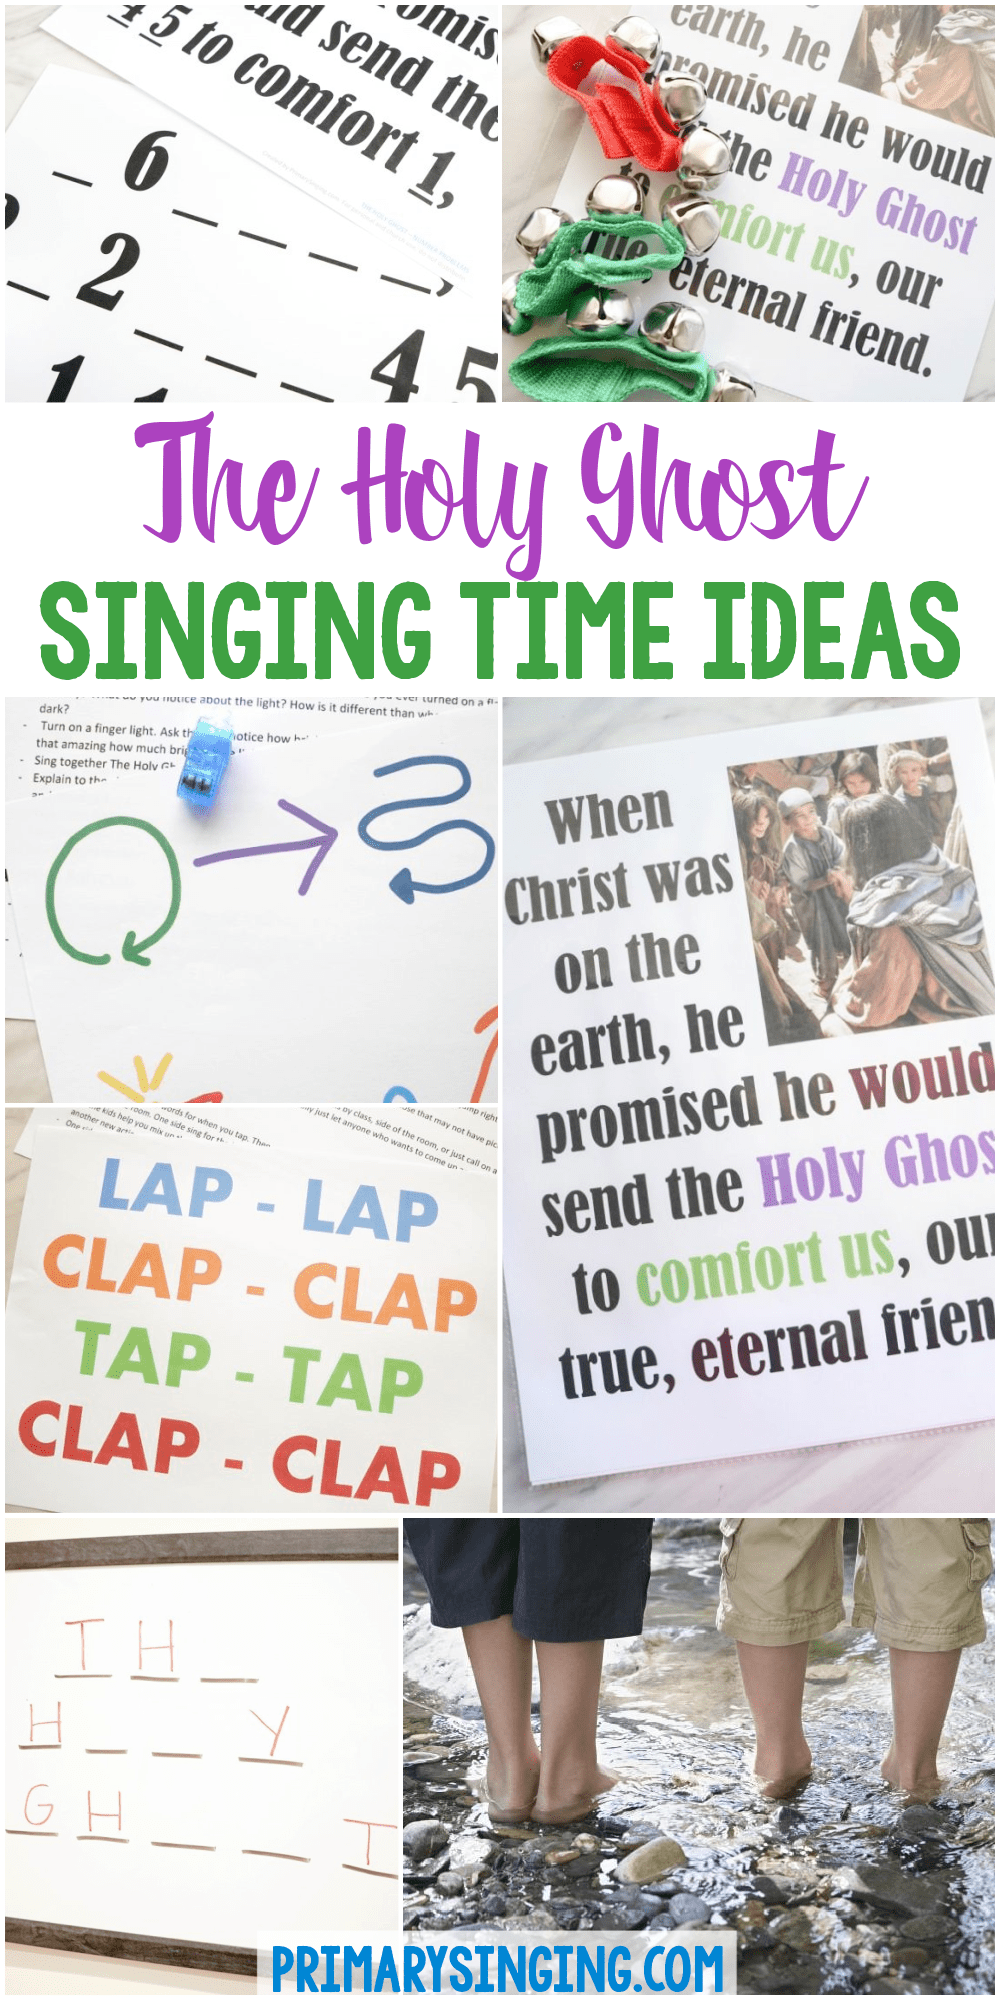 The Holy Ghost Singing Time Ideas for LDS Primary Music Leaders including 12 fun ideas for teaching The Holy Ghost in Primary and printable song helps to boot! Use a numbers crack the code, jingle bells, finger lights, object lesson, movement pattern, and more!